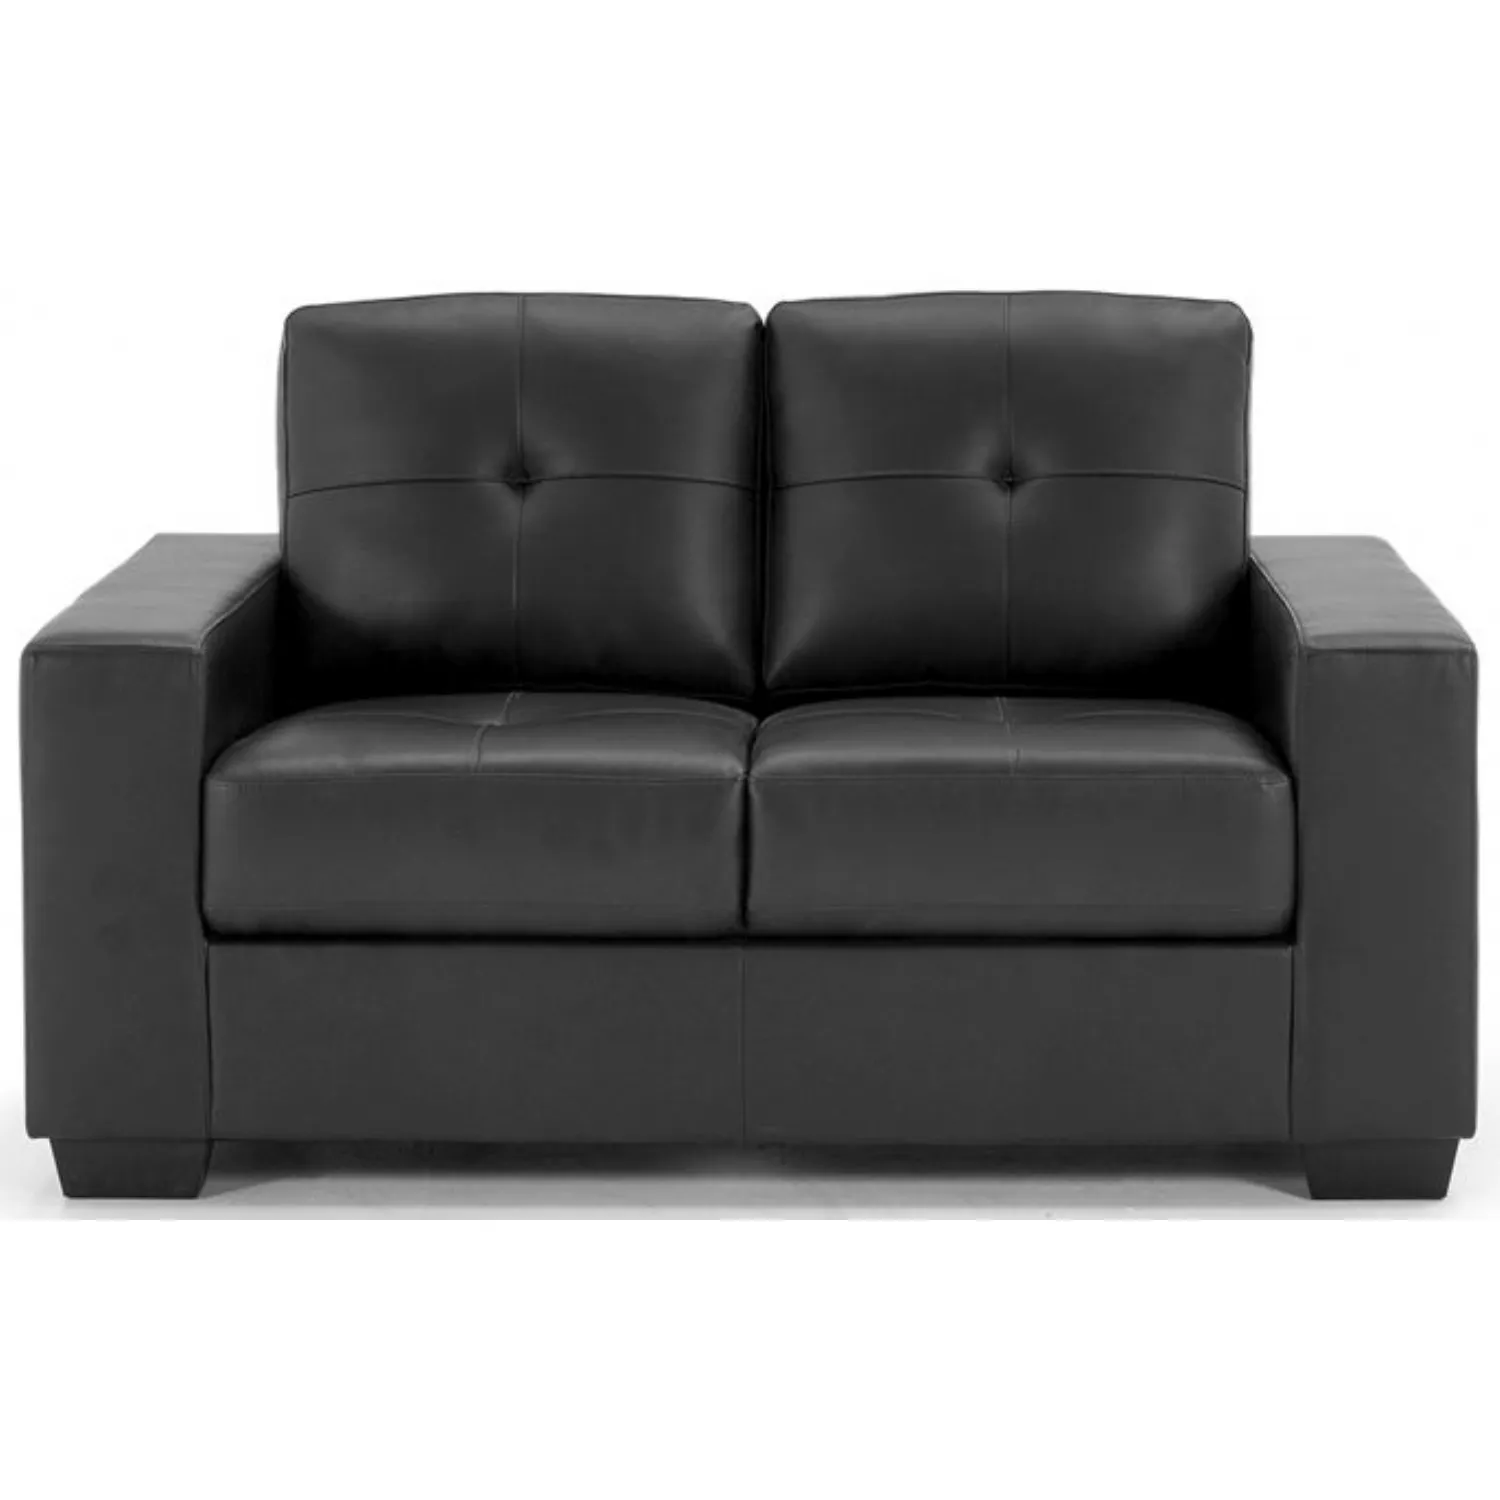 2 Seater Black Leather Buttoned Sofa Dark Wood Base Wide